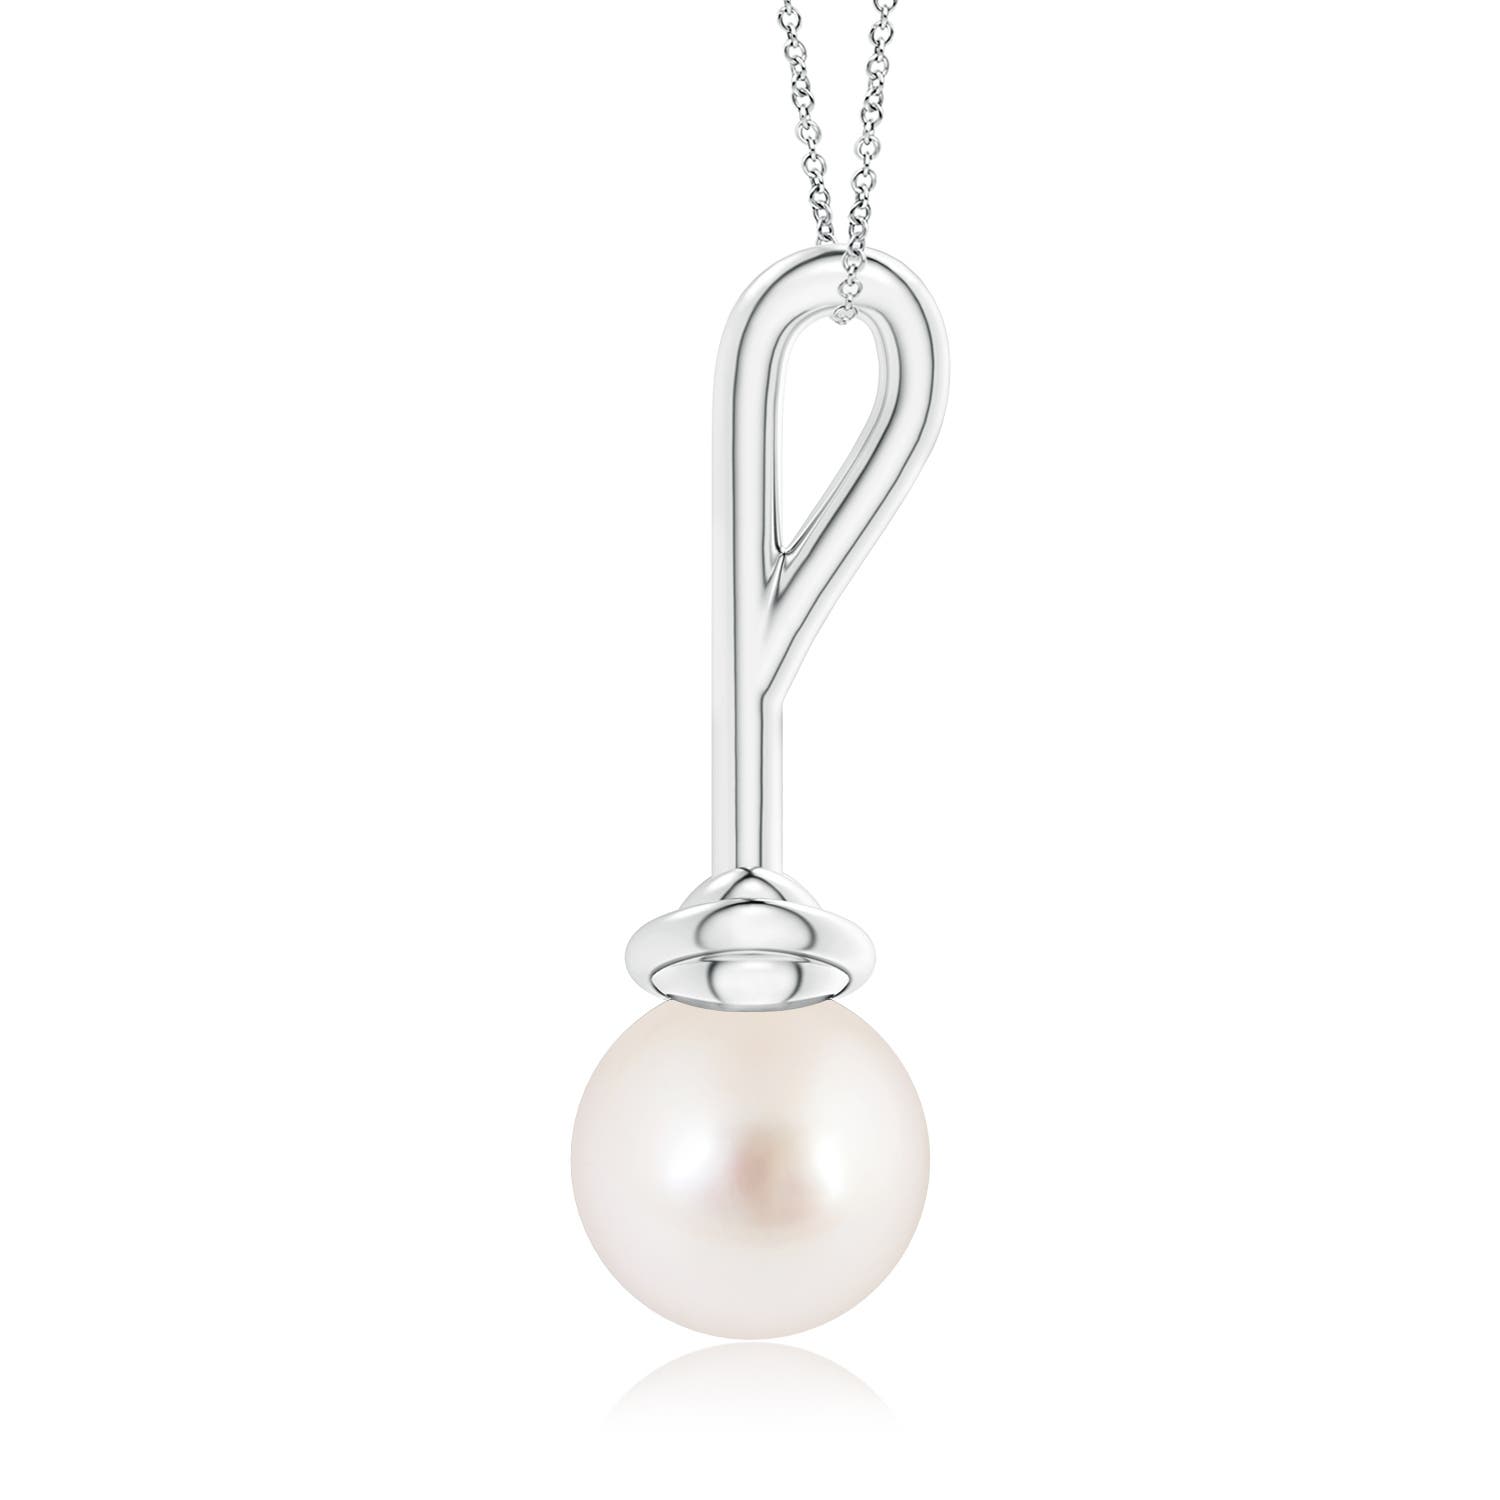 AAAA - South Sea Cultured Pearl / 7.2 CT / 14 KT White Gold